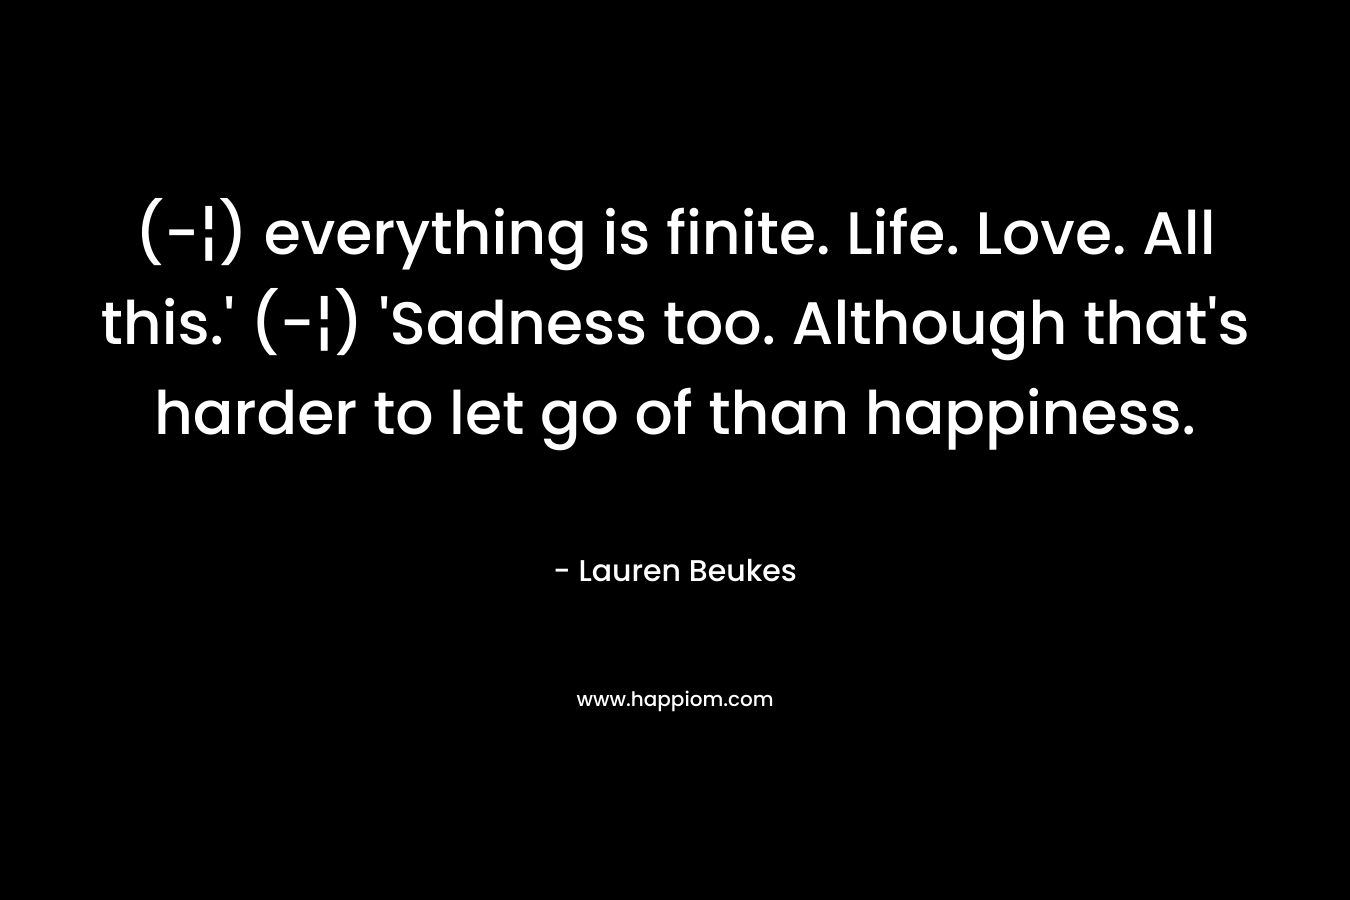 (-¦) everything is finite. Life. Love. All this.' (-¦) 'Sadness too. Although that's harder to let go of than happiness.